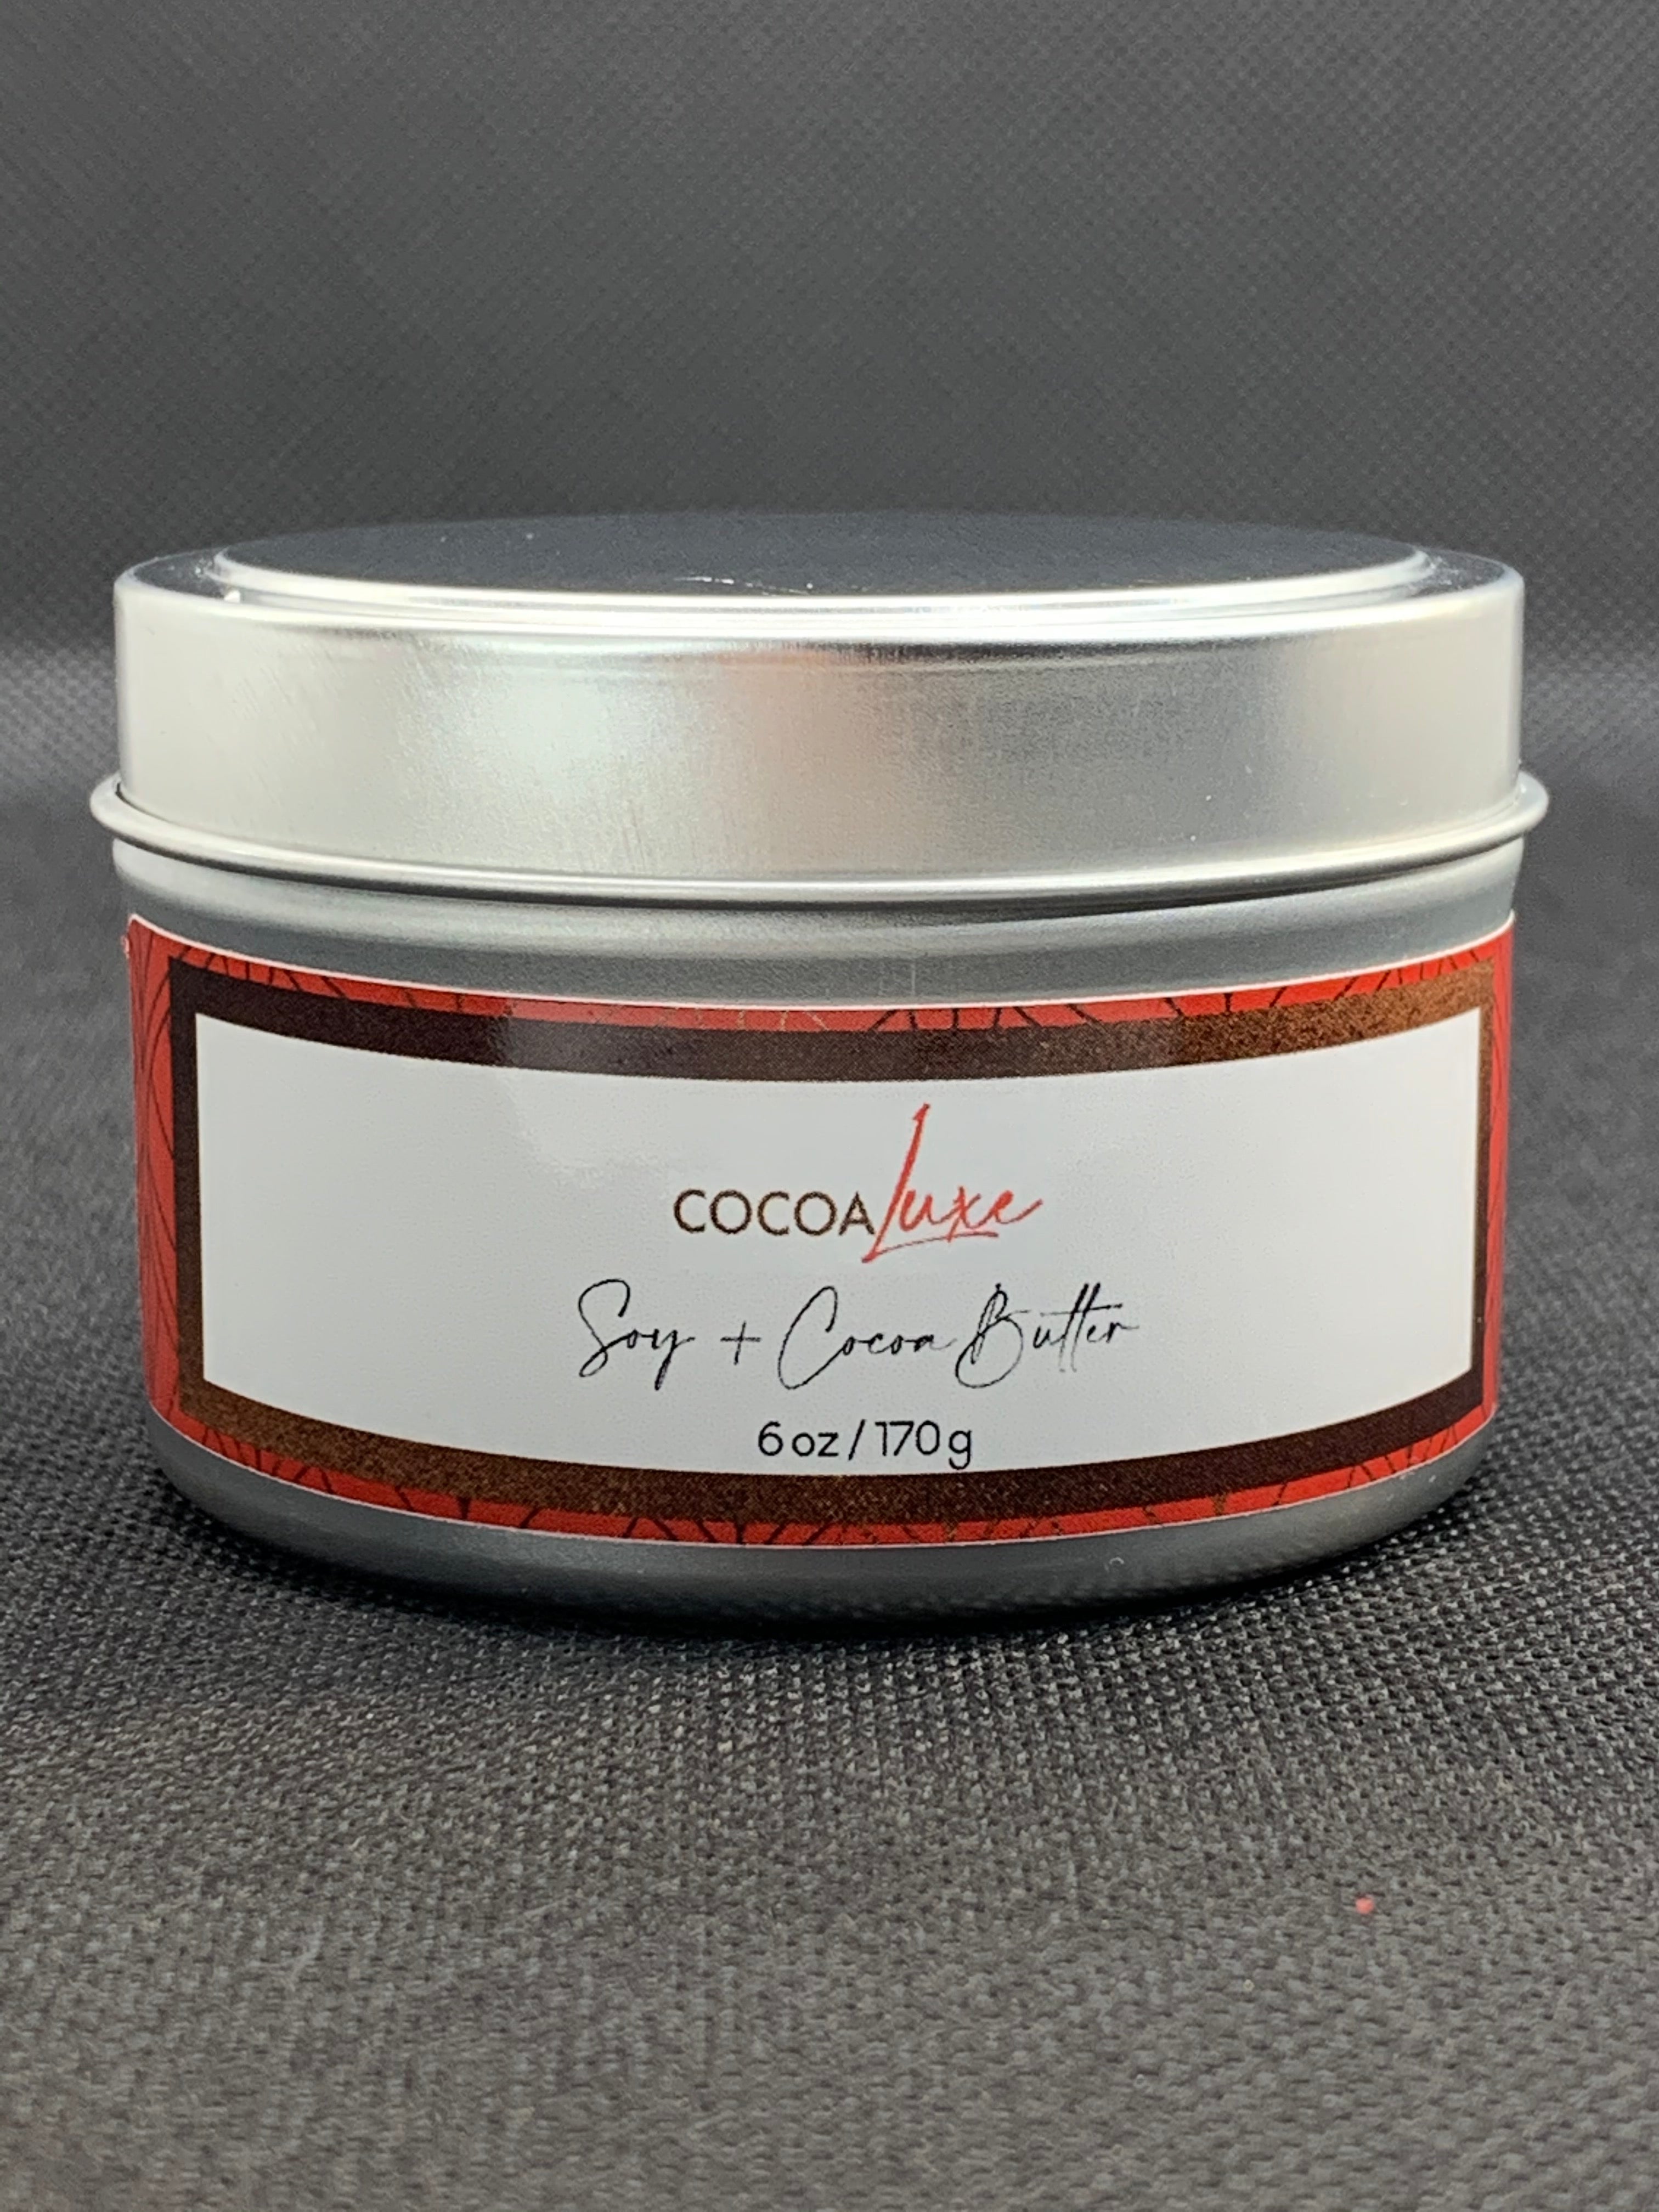 Soy + Cocoa Butter Candle - 6oz.